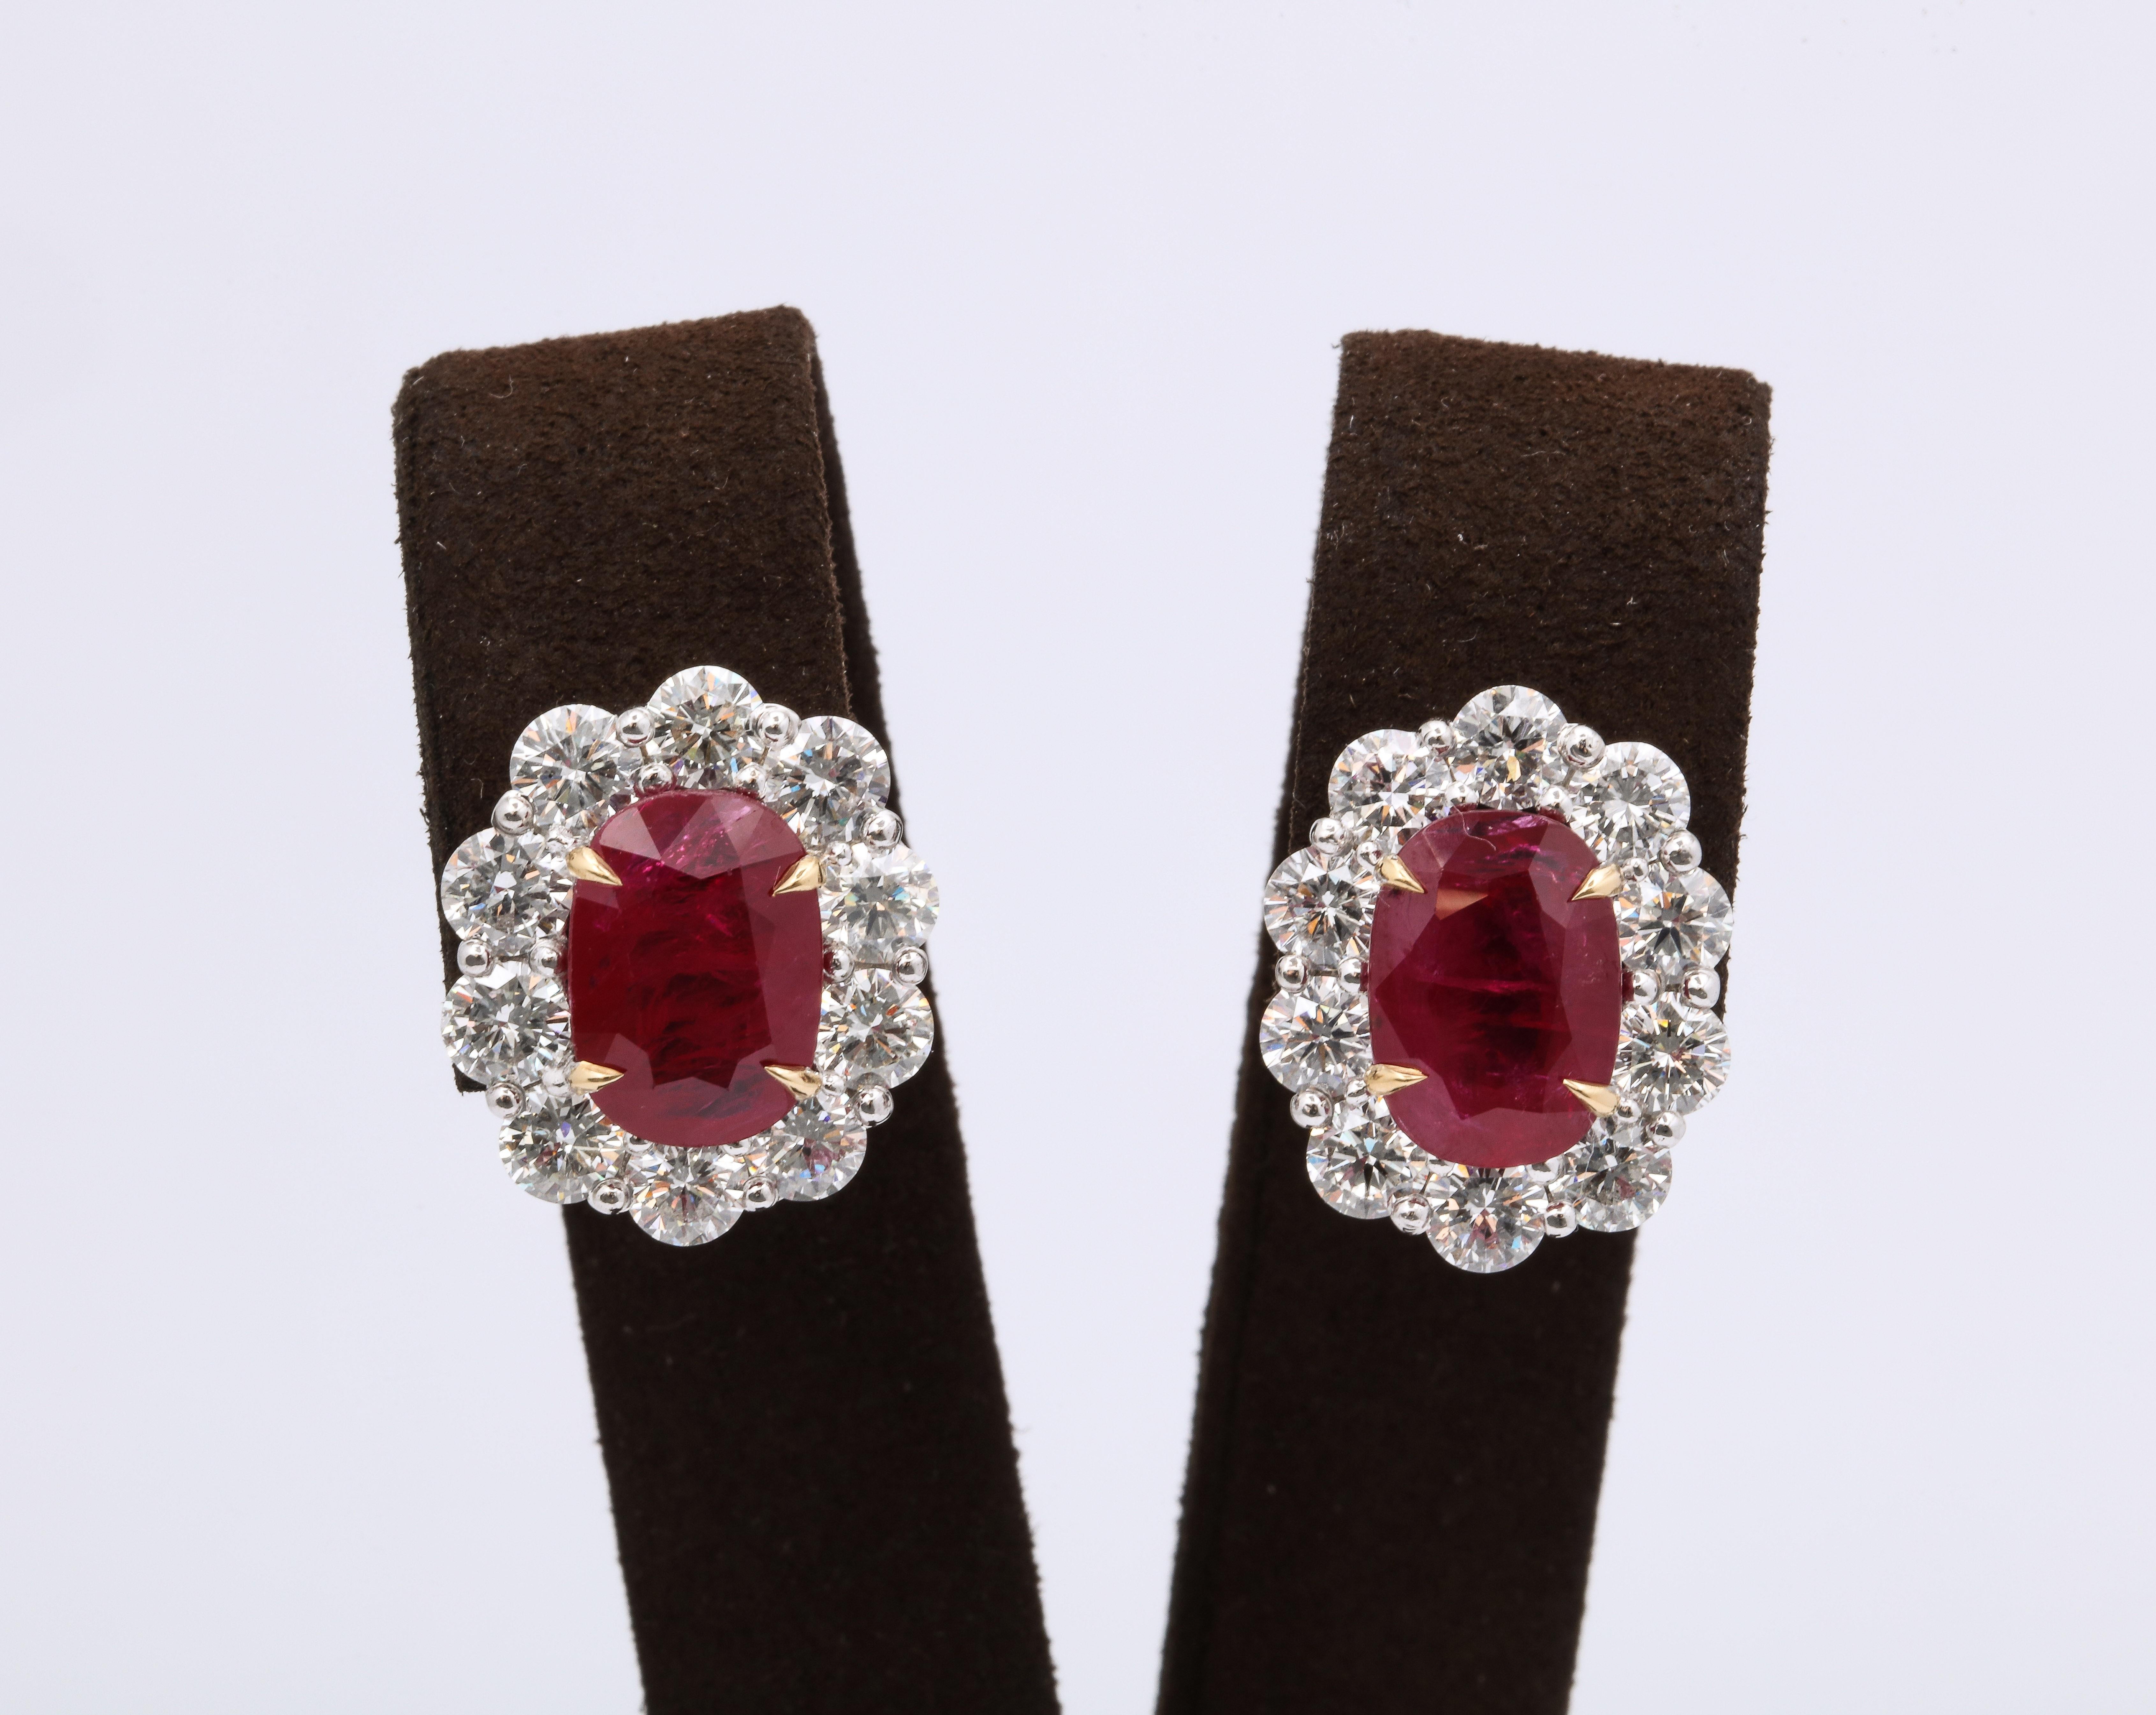 
Classic Ruby and Diamond Earrings

10.16 carats 